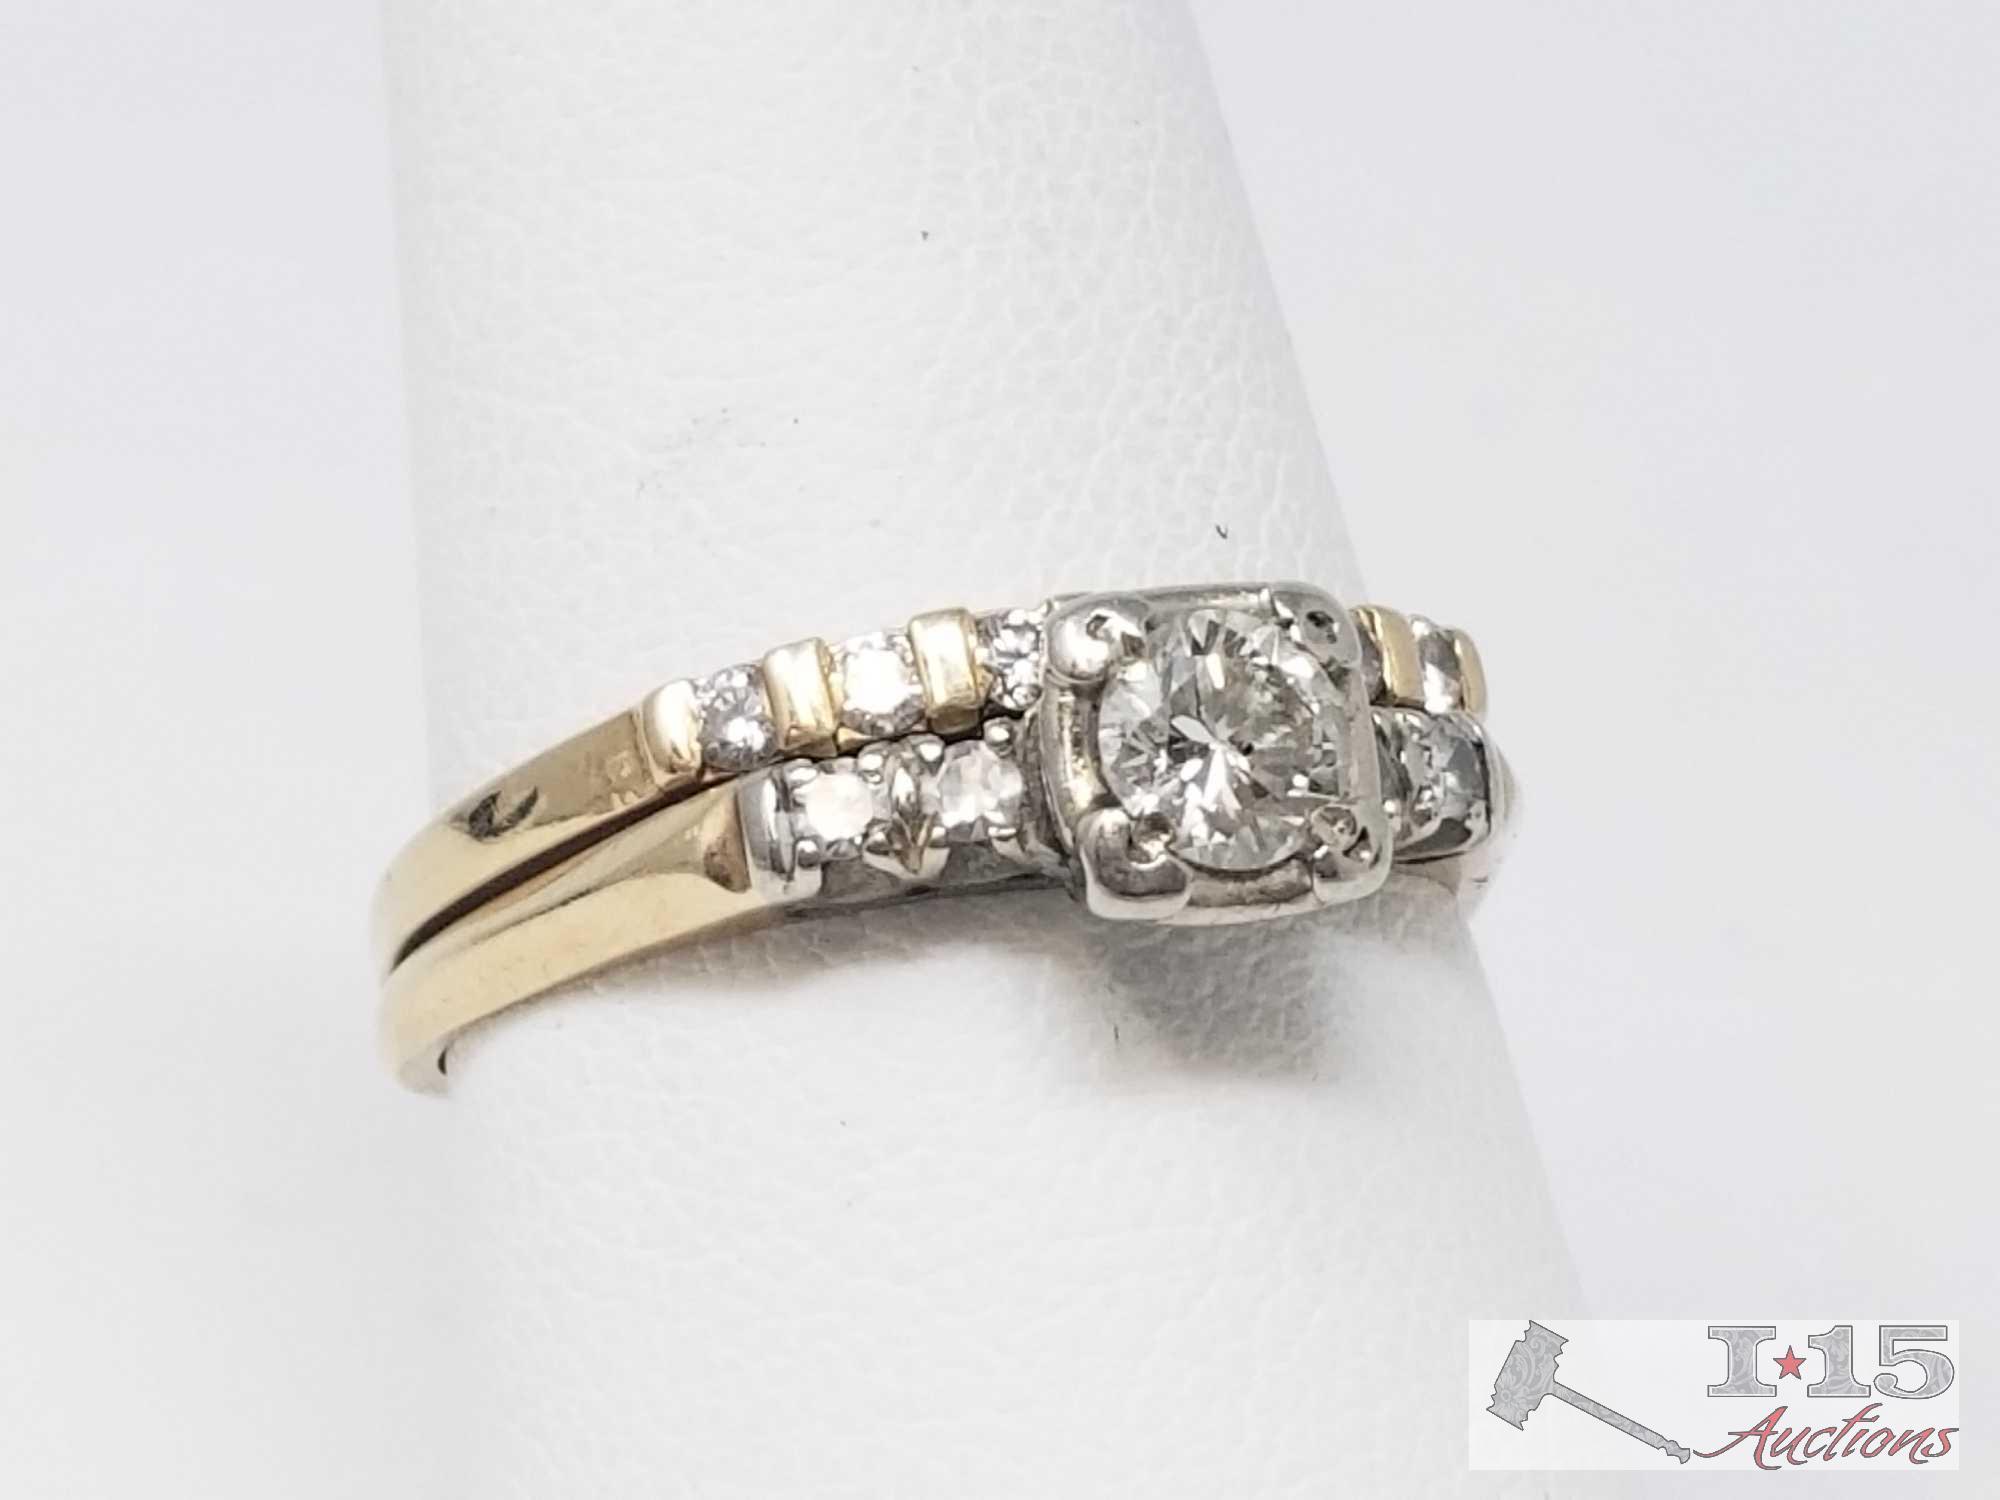 14k Gold Ring with a 1/4 ct Center Diamond and Accent Diamonds, 4g, Size 8.5